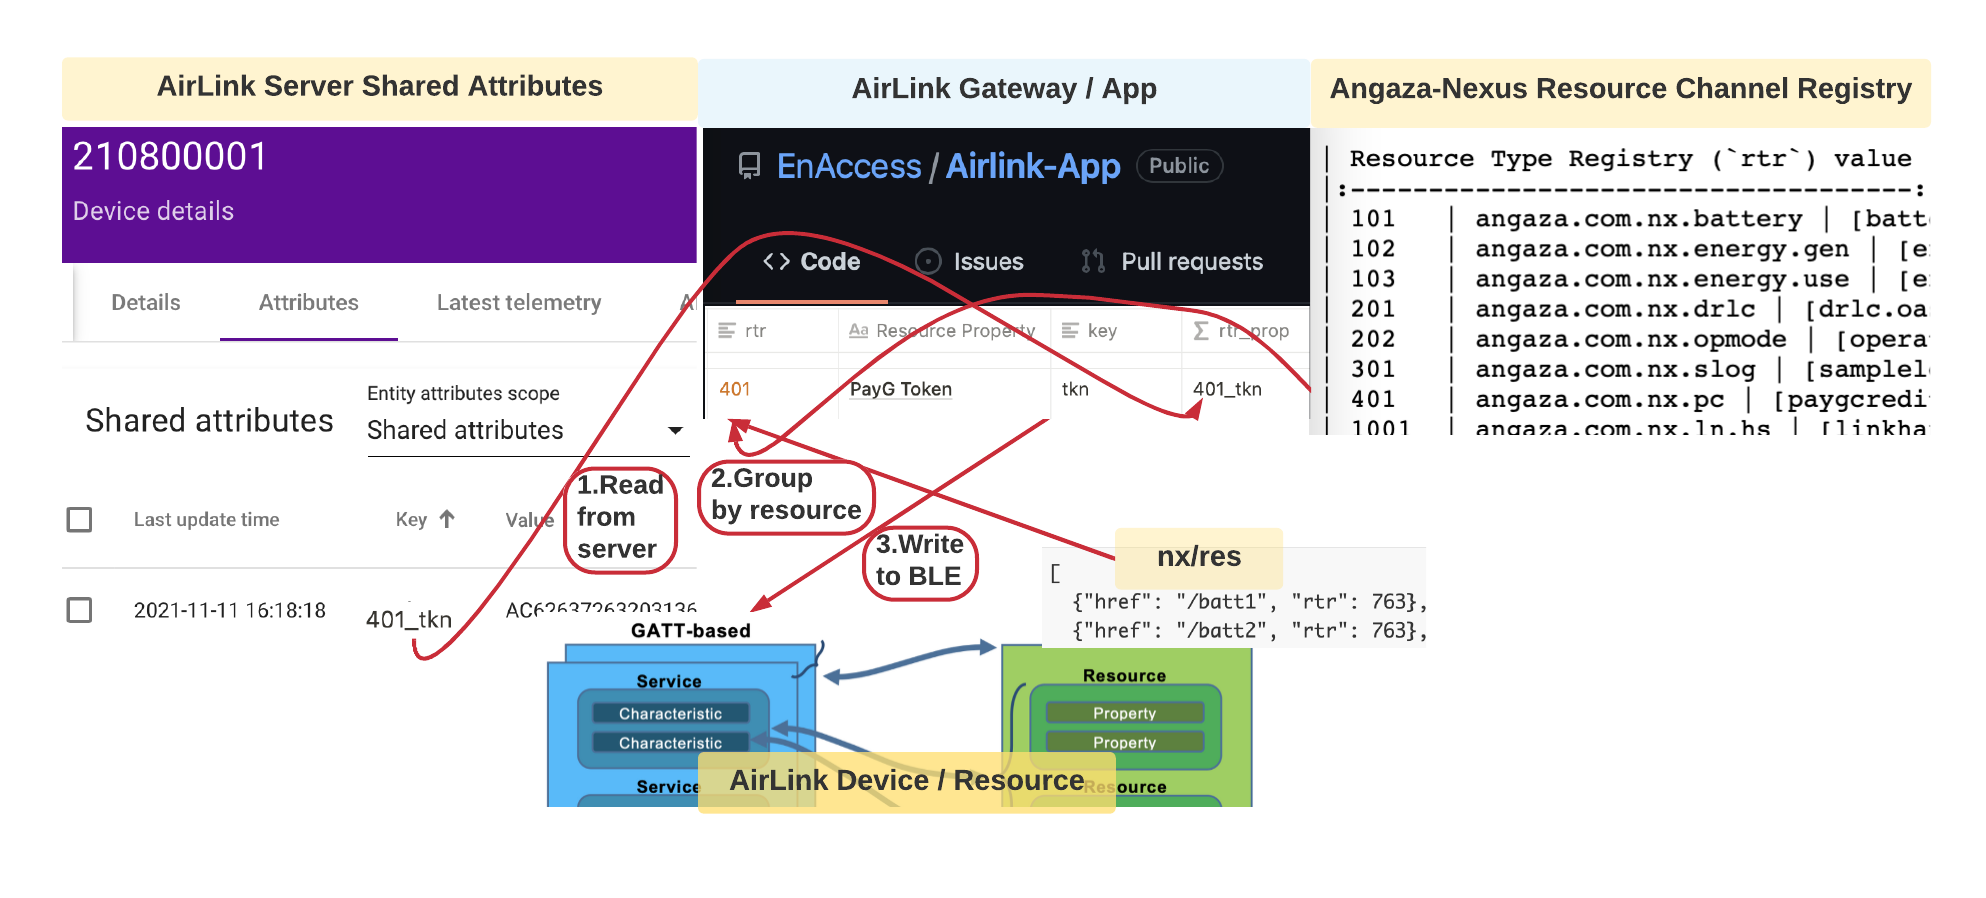 AirLink Gateways or this App maps Server and Device properties